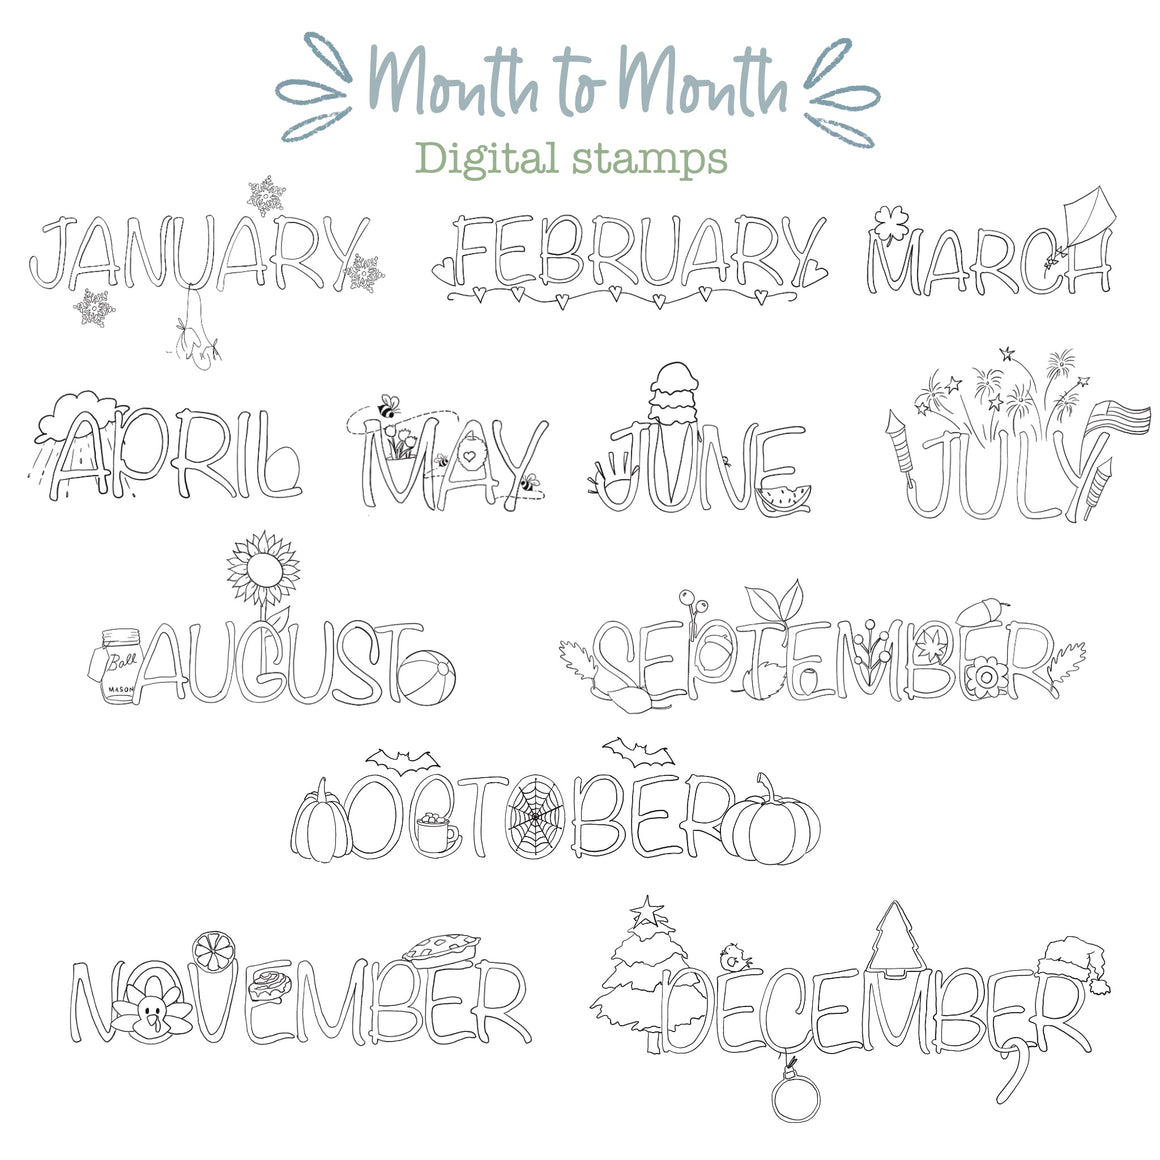 Month to Month Illustrations